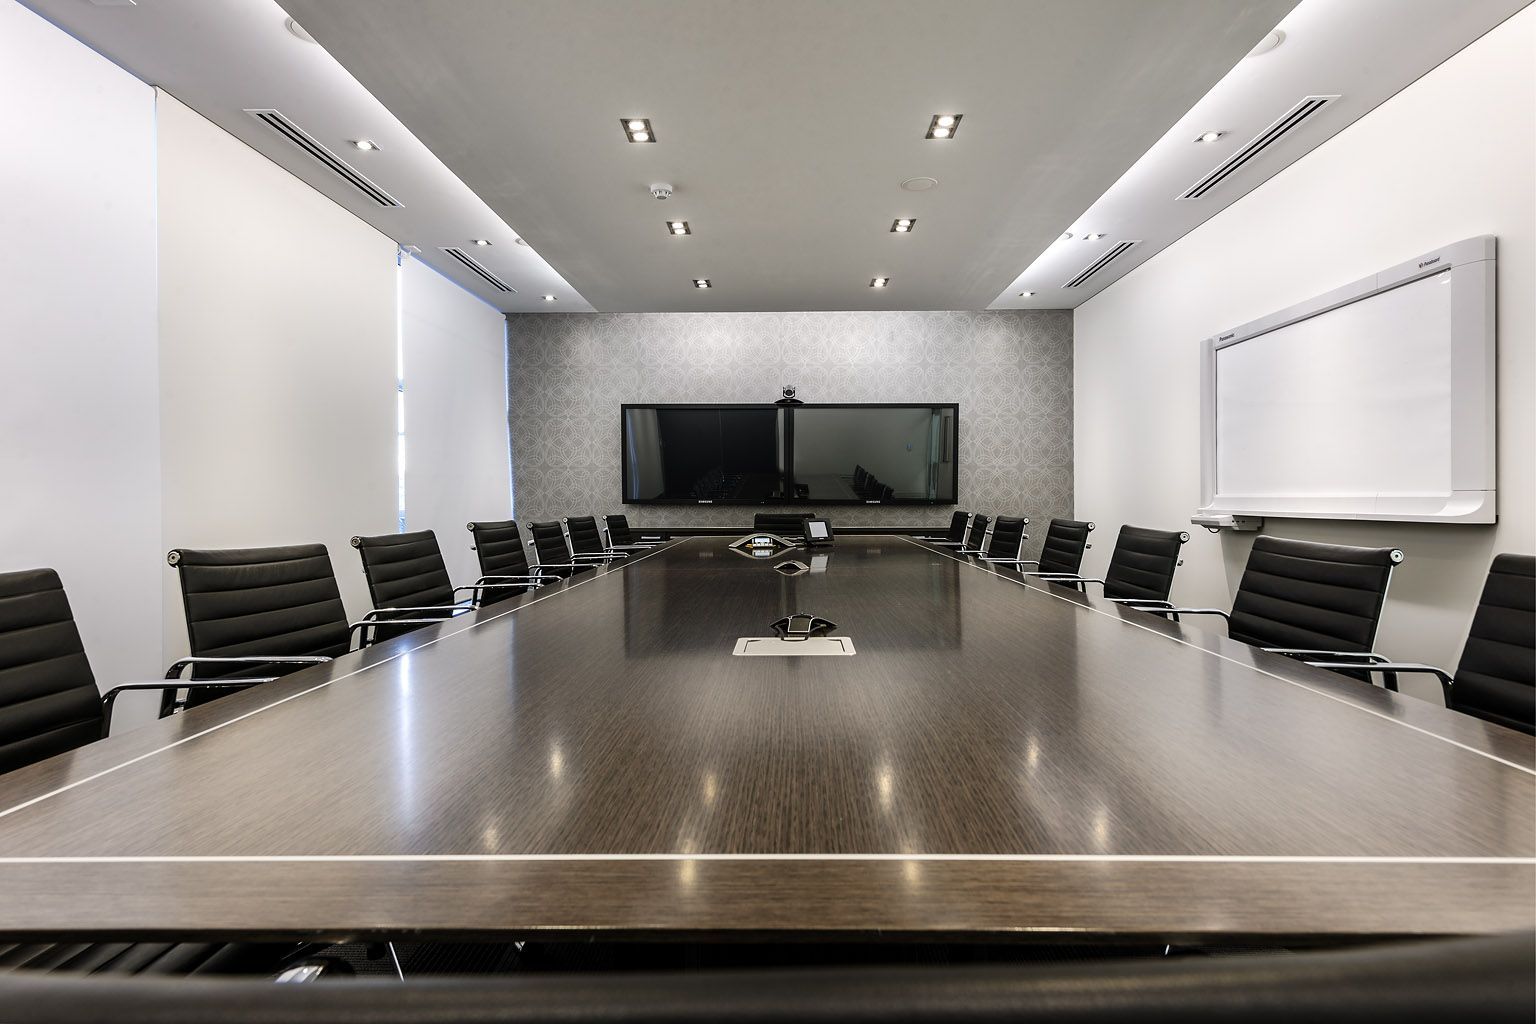 Executive Conference Room: AV Business & Corporate Solution - Atlona